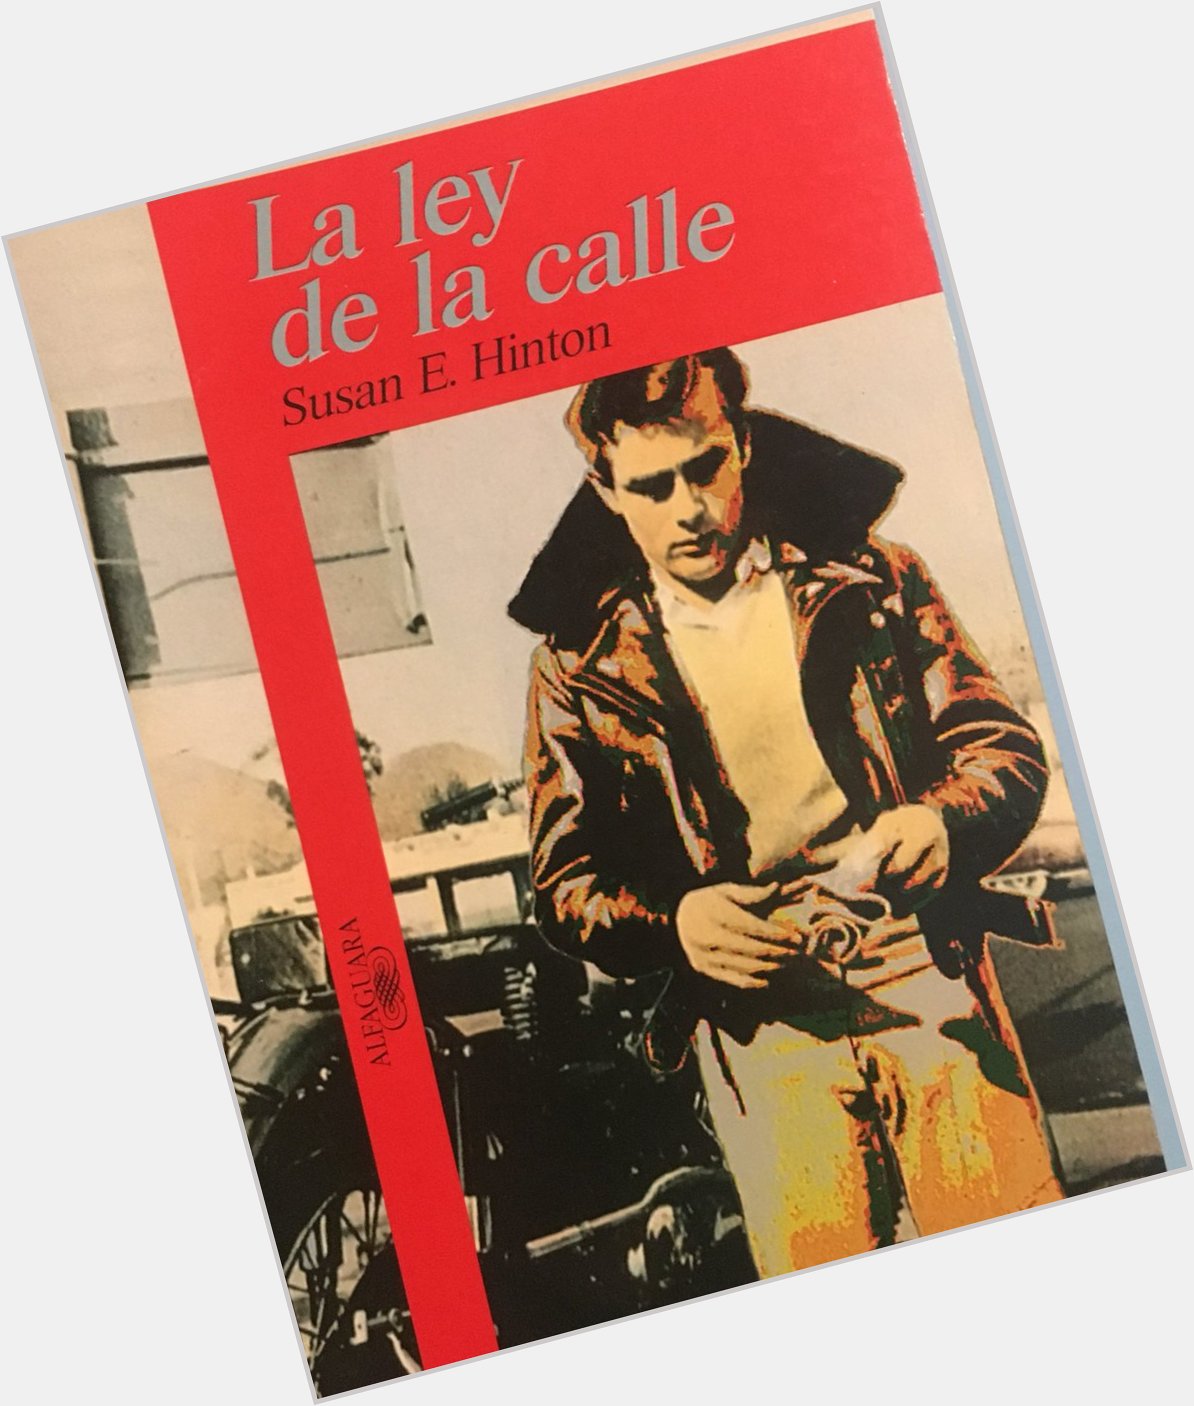 Happy birthday to James Dean. Seen on a favourite Rumble Fish book cover of mine in a Spanish translation 